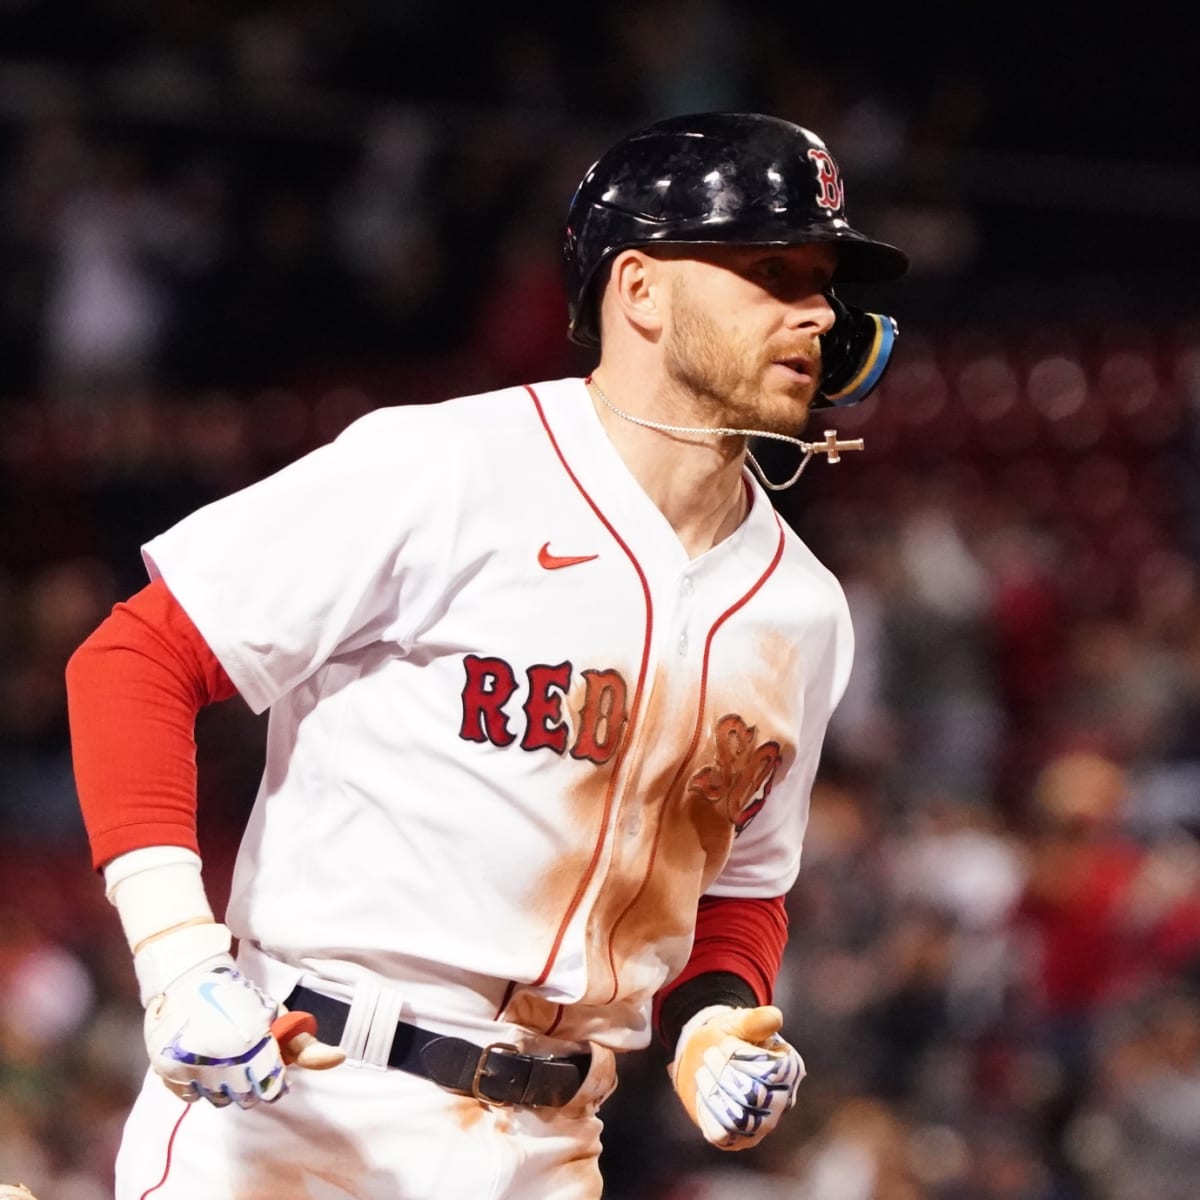 WATCH: Trevor Story Hits Third Home Run of Night for Red Sox Against  Mariners - Fastball